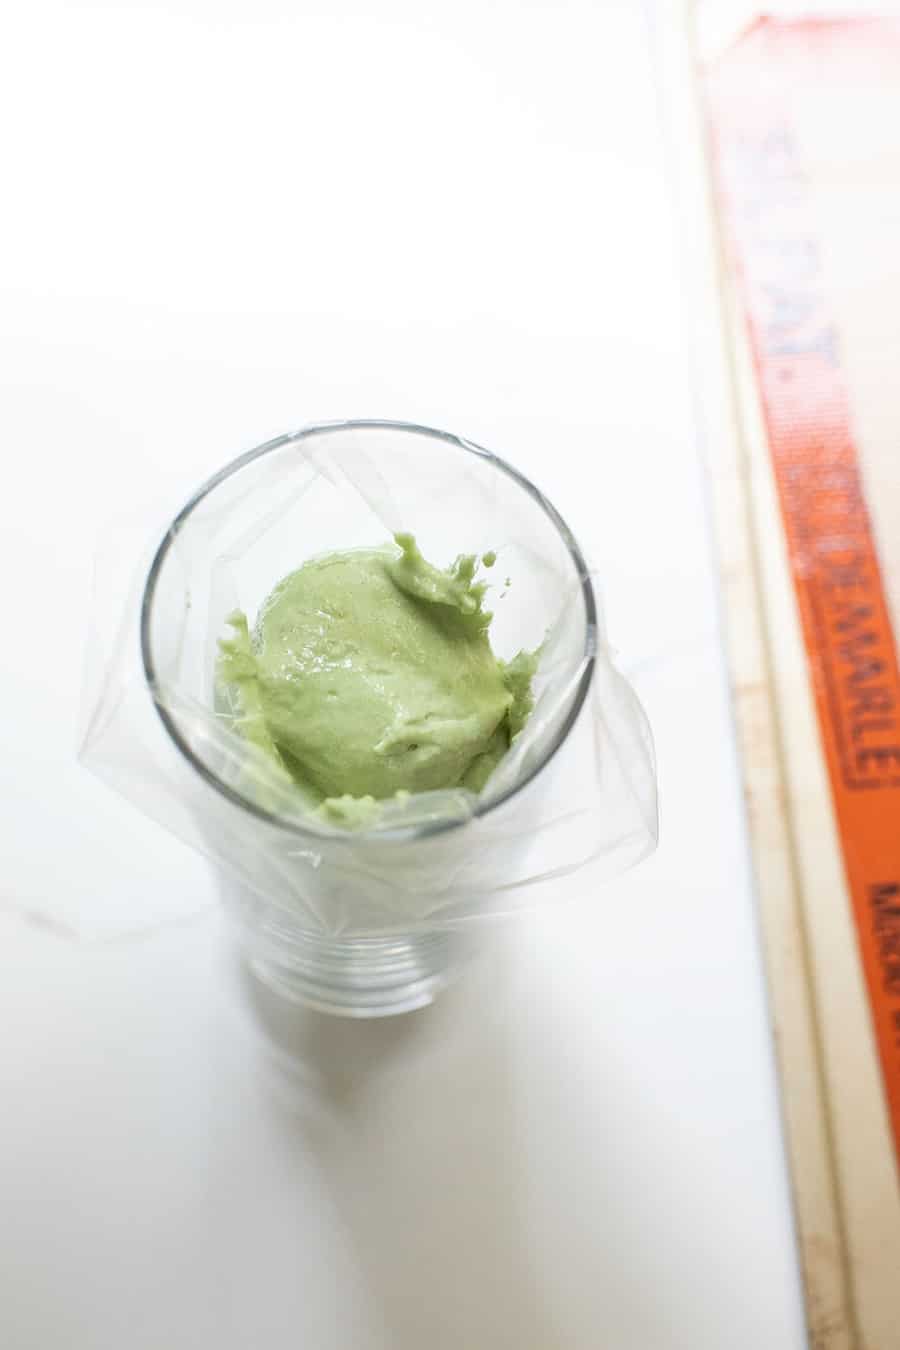 Green macaron batter in a cup.